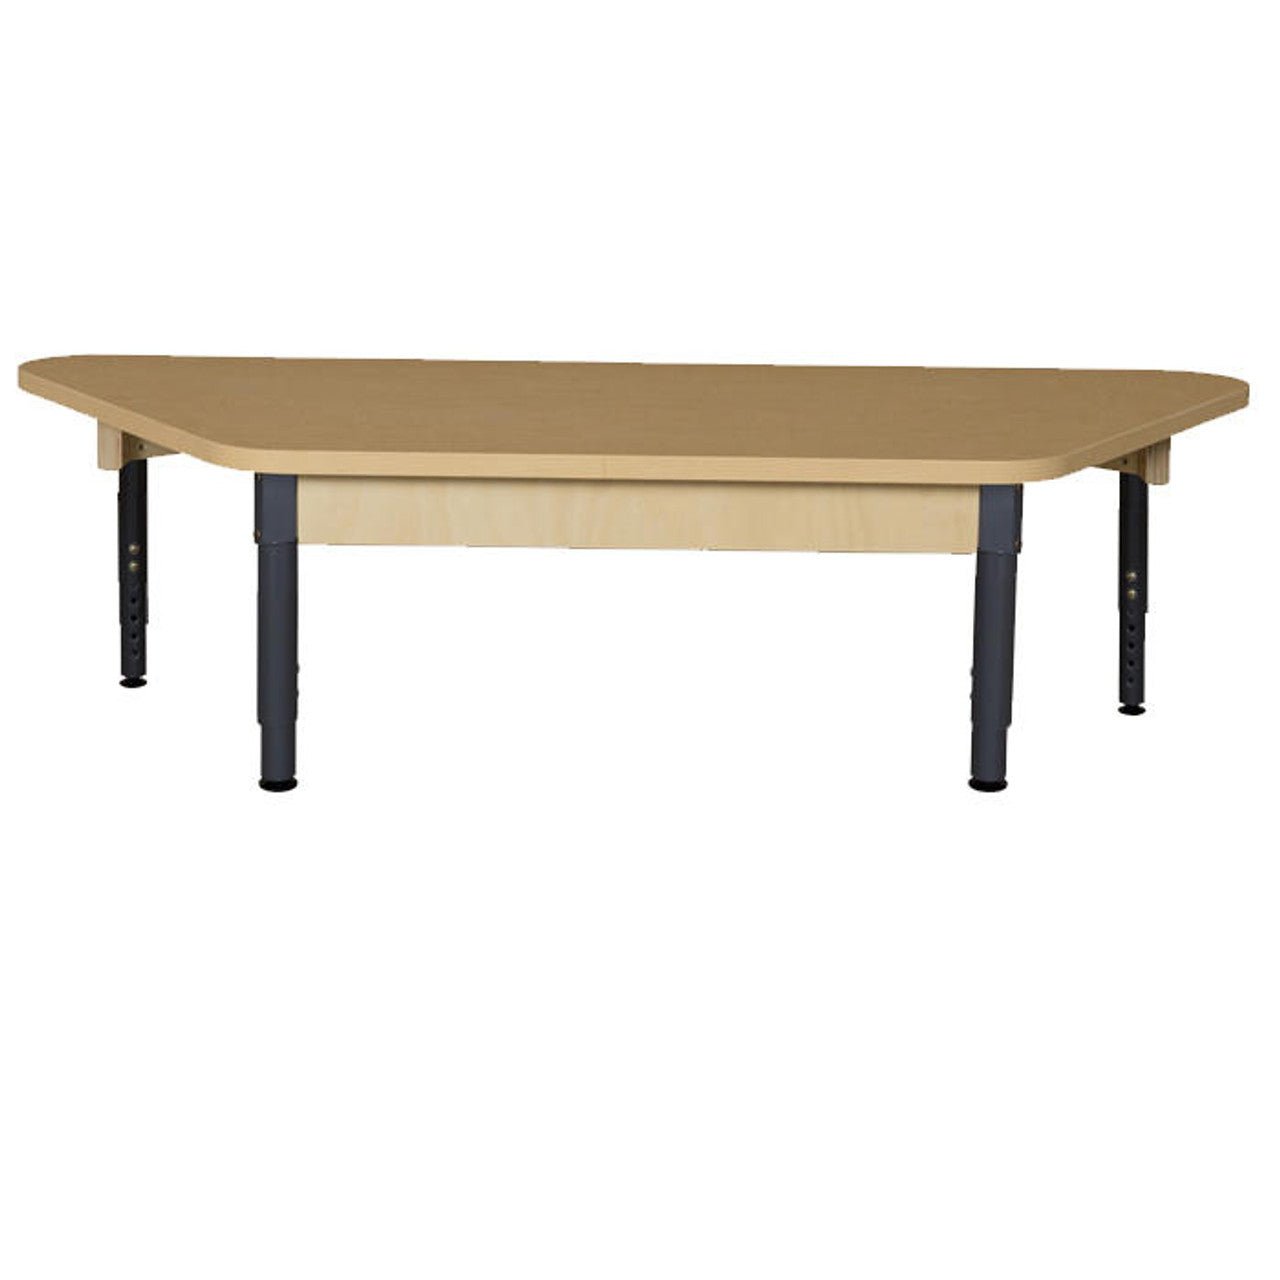 Trapezoidal High Pressure Laminate Table with Adjustable Legs 12"-17"